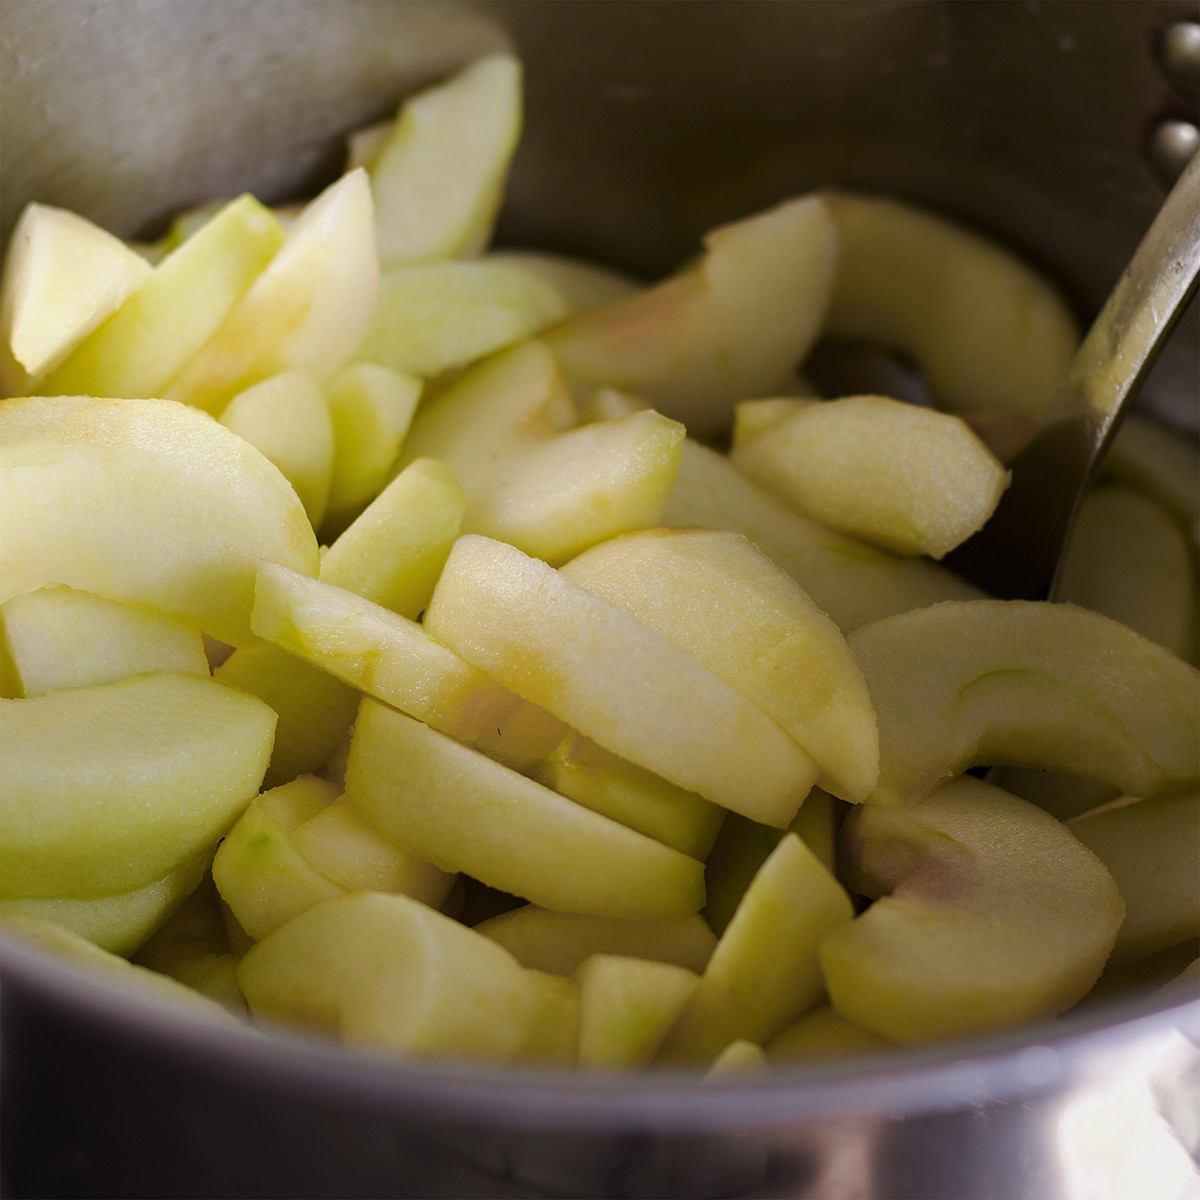 A saucepan filled with sliced green apples.